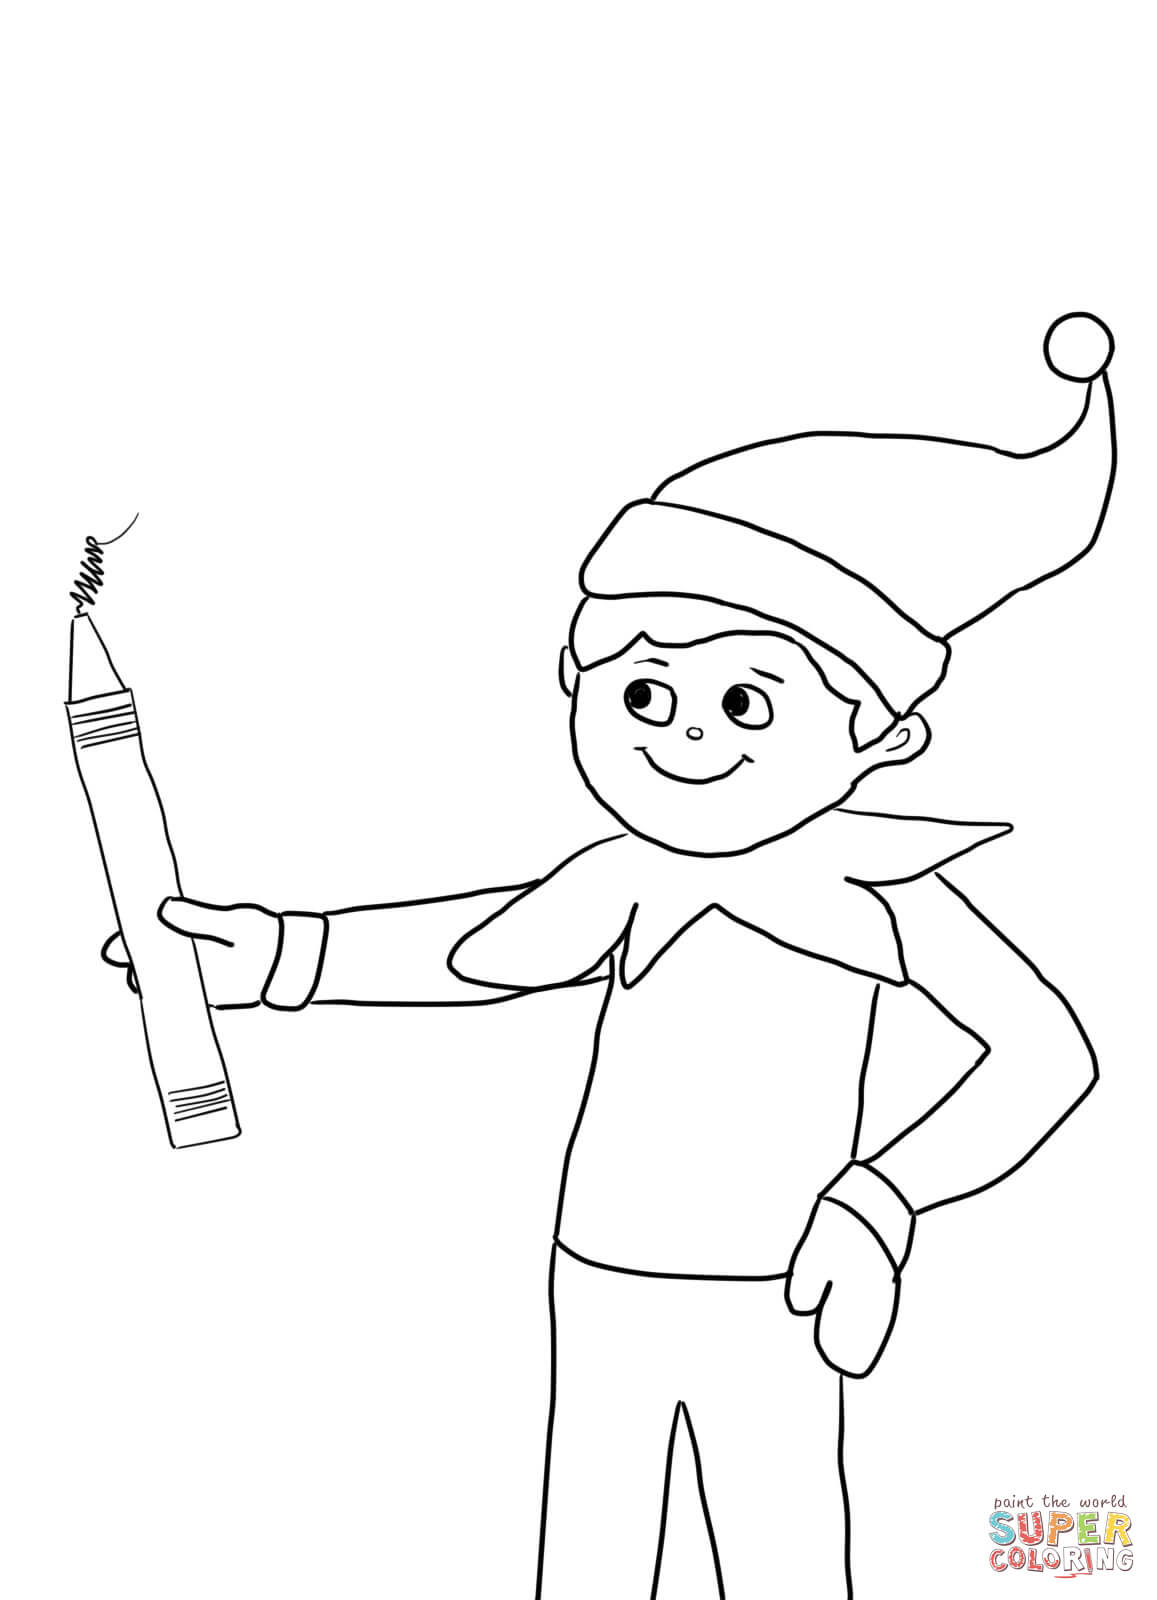 13 Pics of Real Elf On The Shelf Coloring Pages - Elf On the Shelf ...